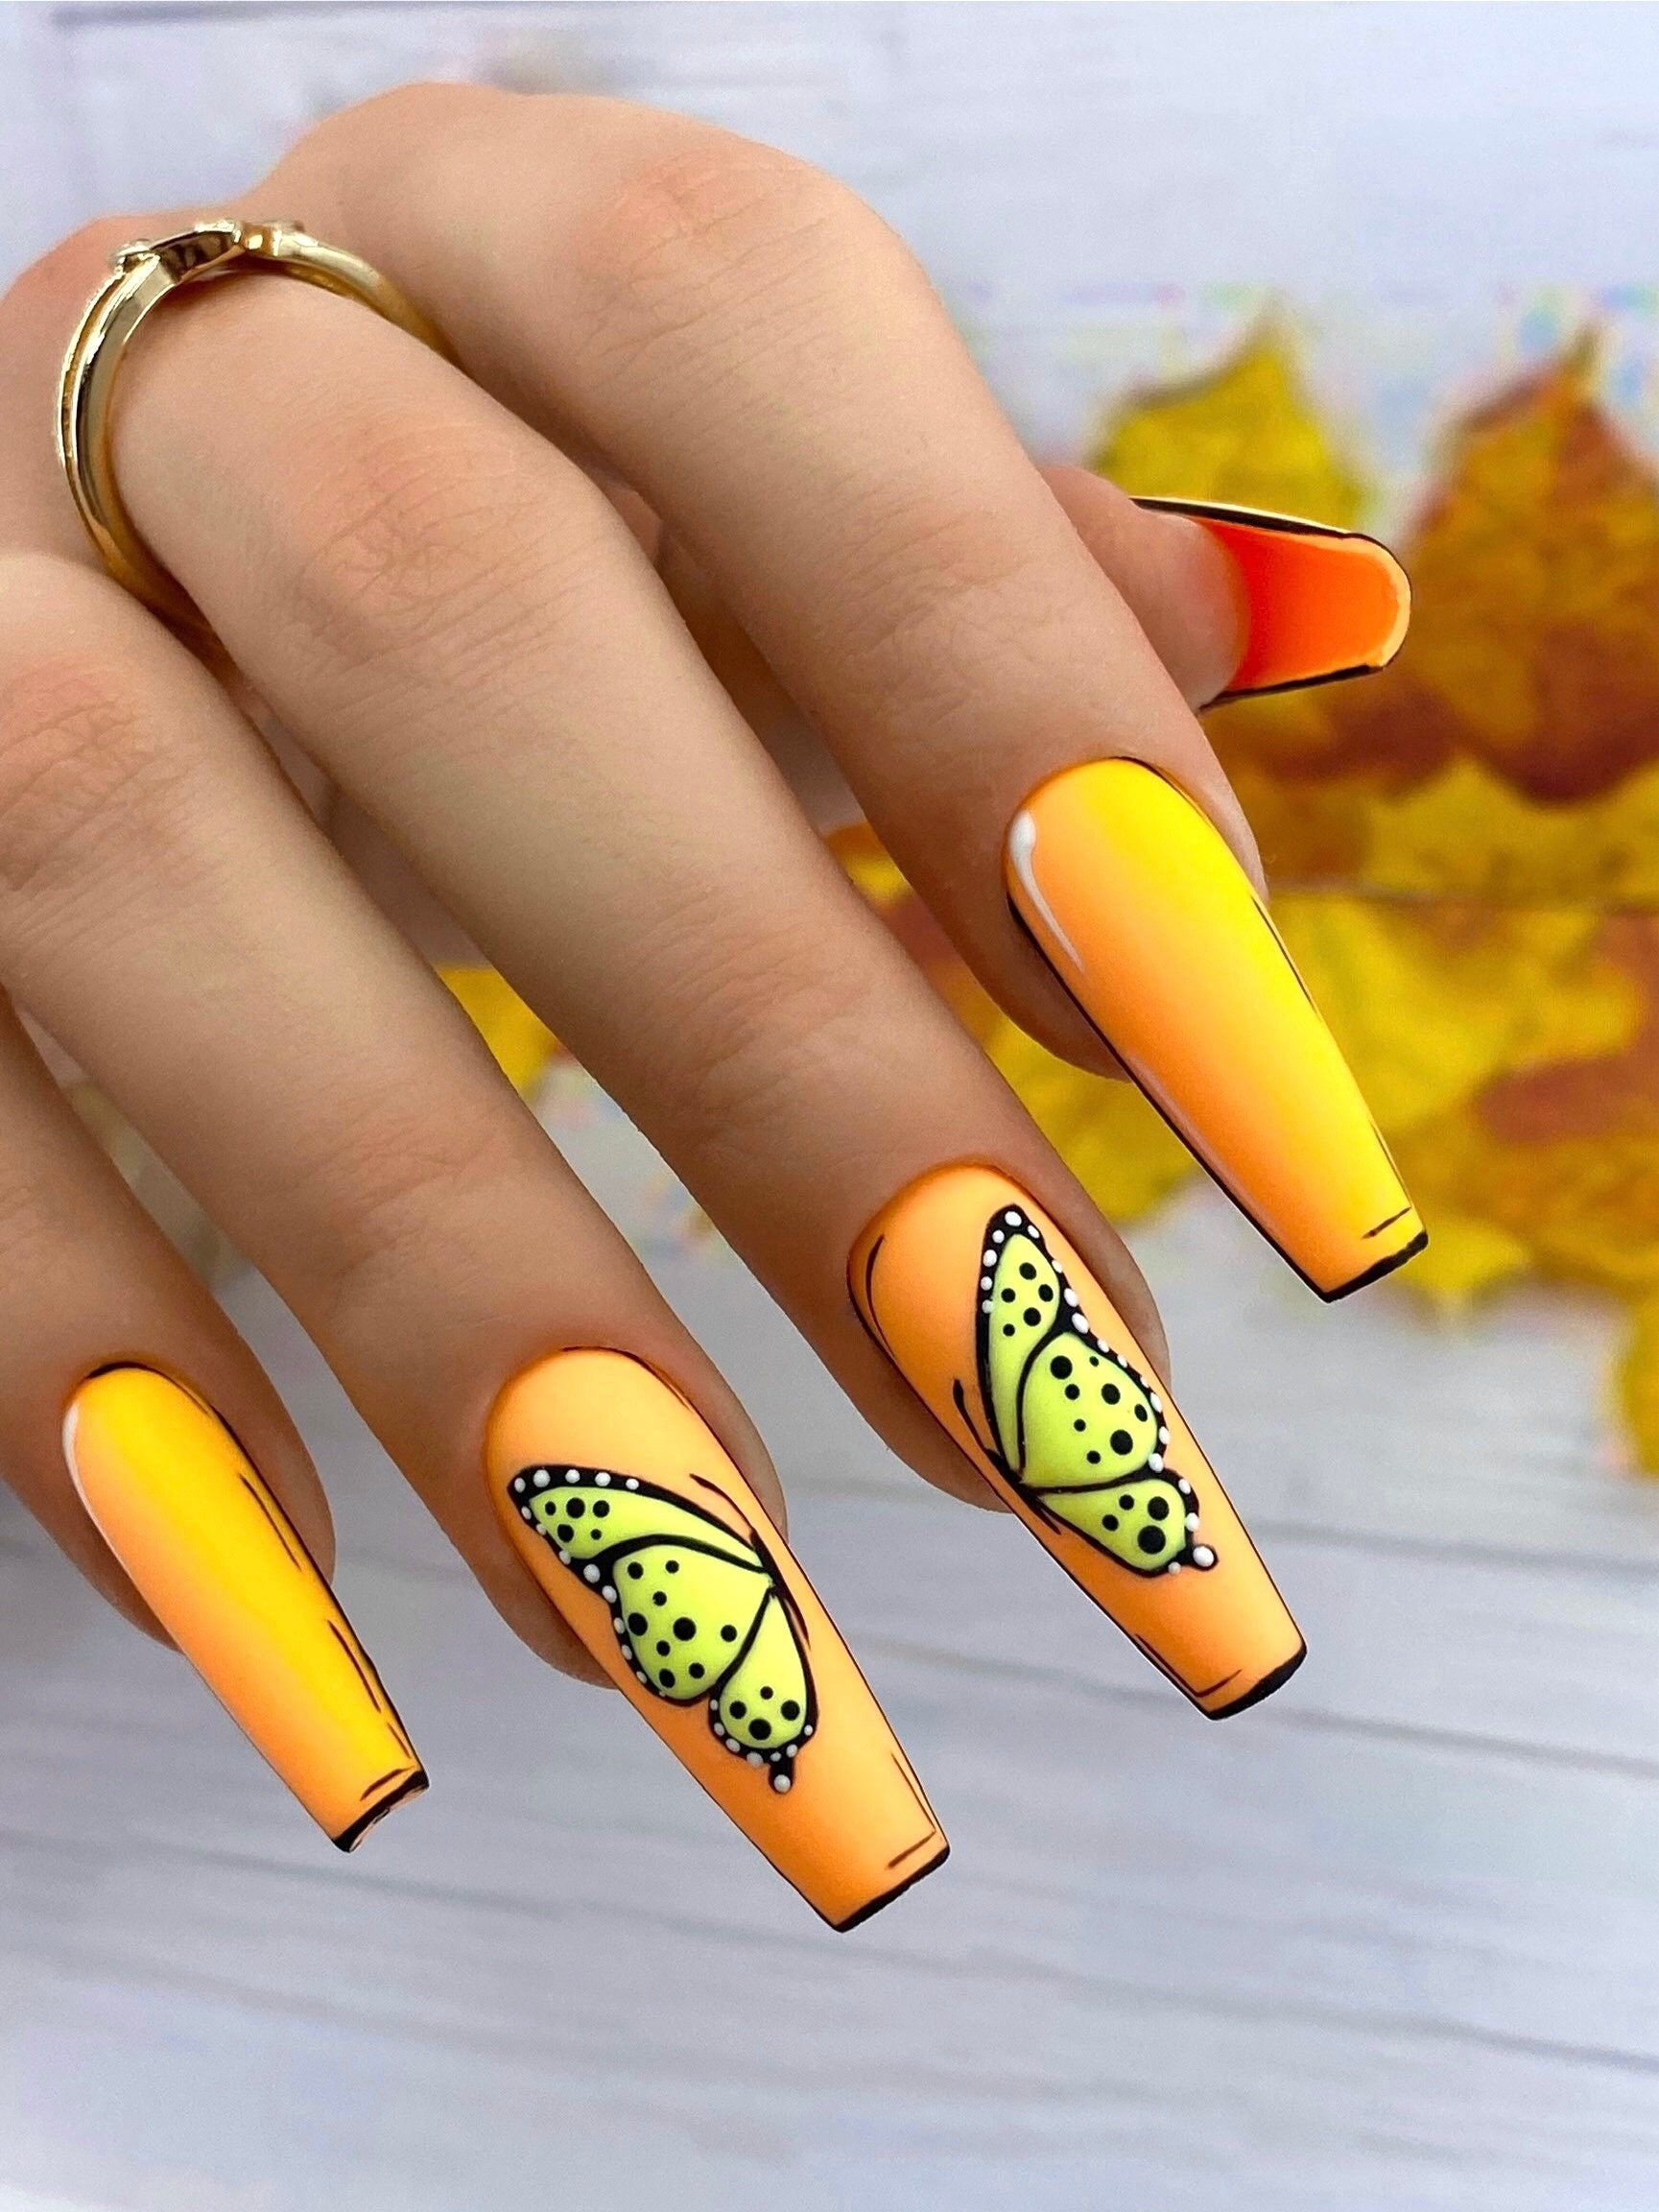 40+ Best Acrylic Nail Designs You Will Surely Love